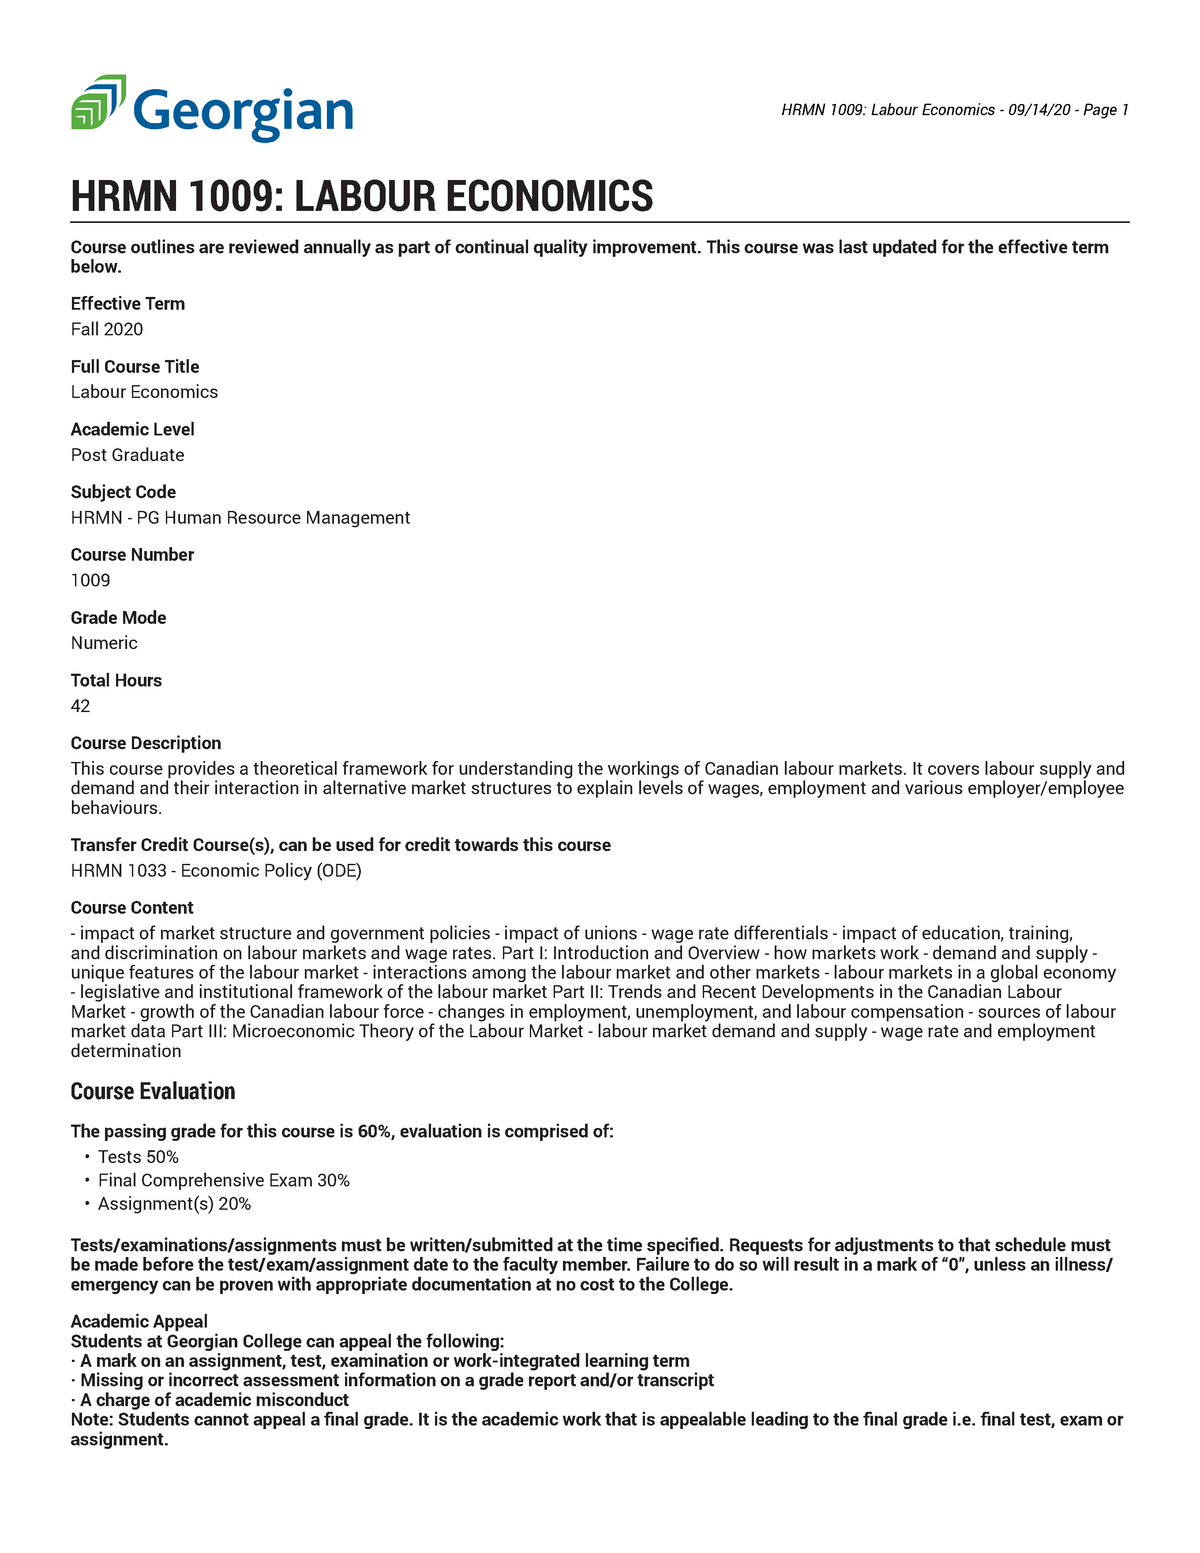 Labour Economics It S The Outline Of The Course In Human Resource Management Hrmn